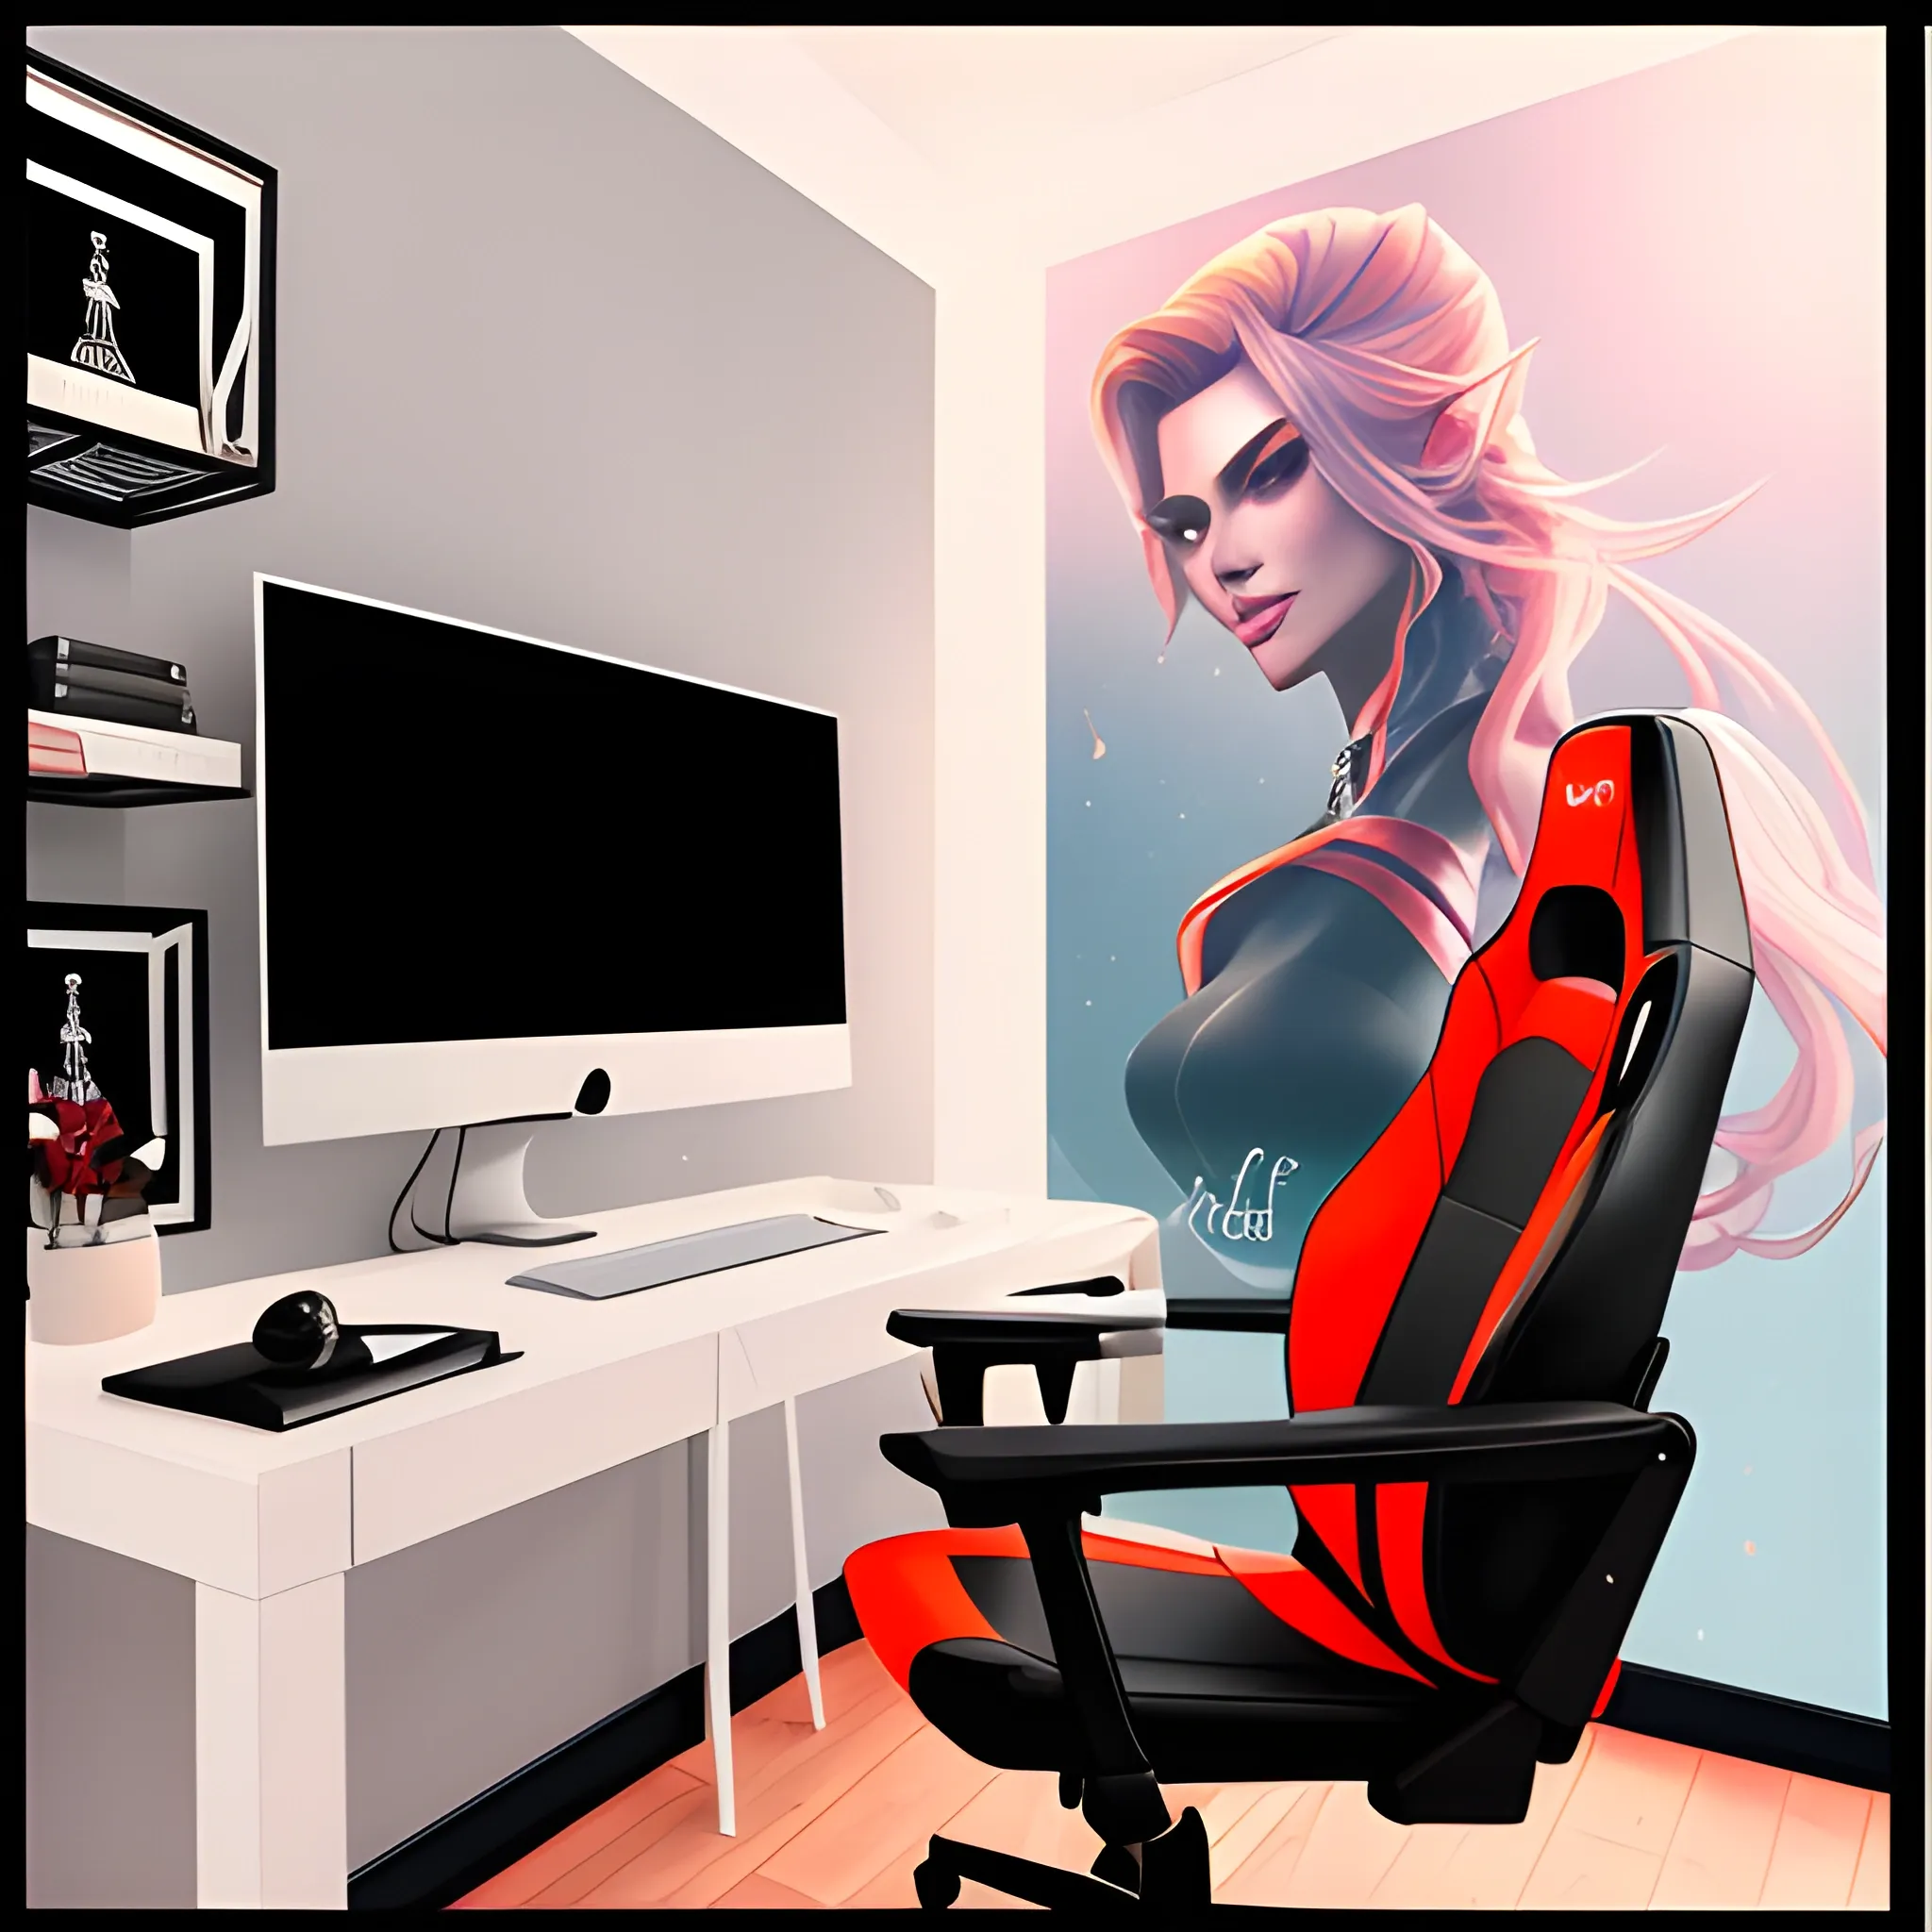 A beautiful girl while streaming, attractive gaming room background, 2d hd mascot 1080:1920 picels image